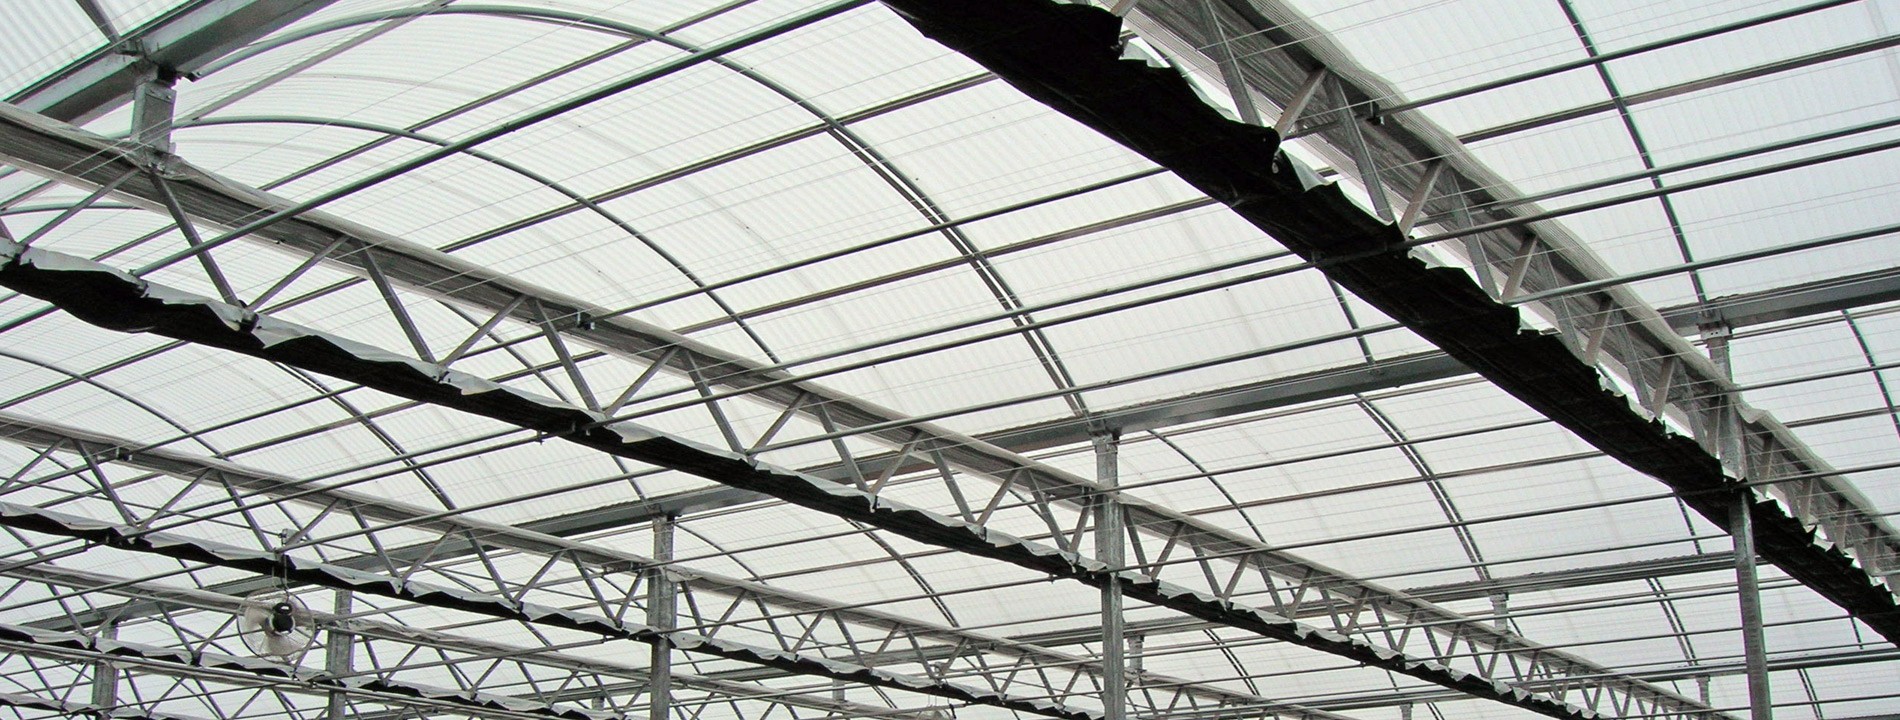 arched roof greenhouse